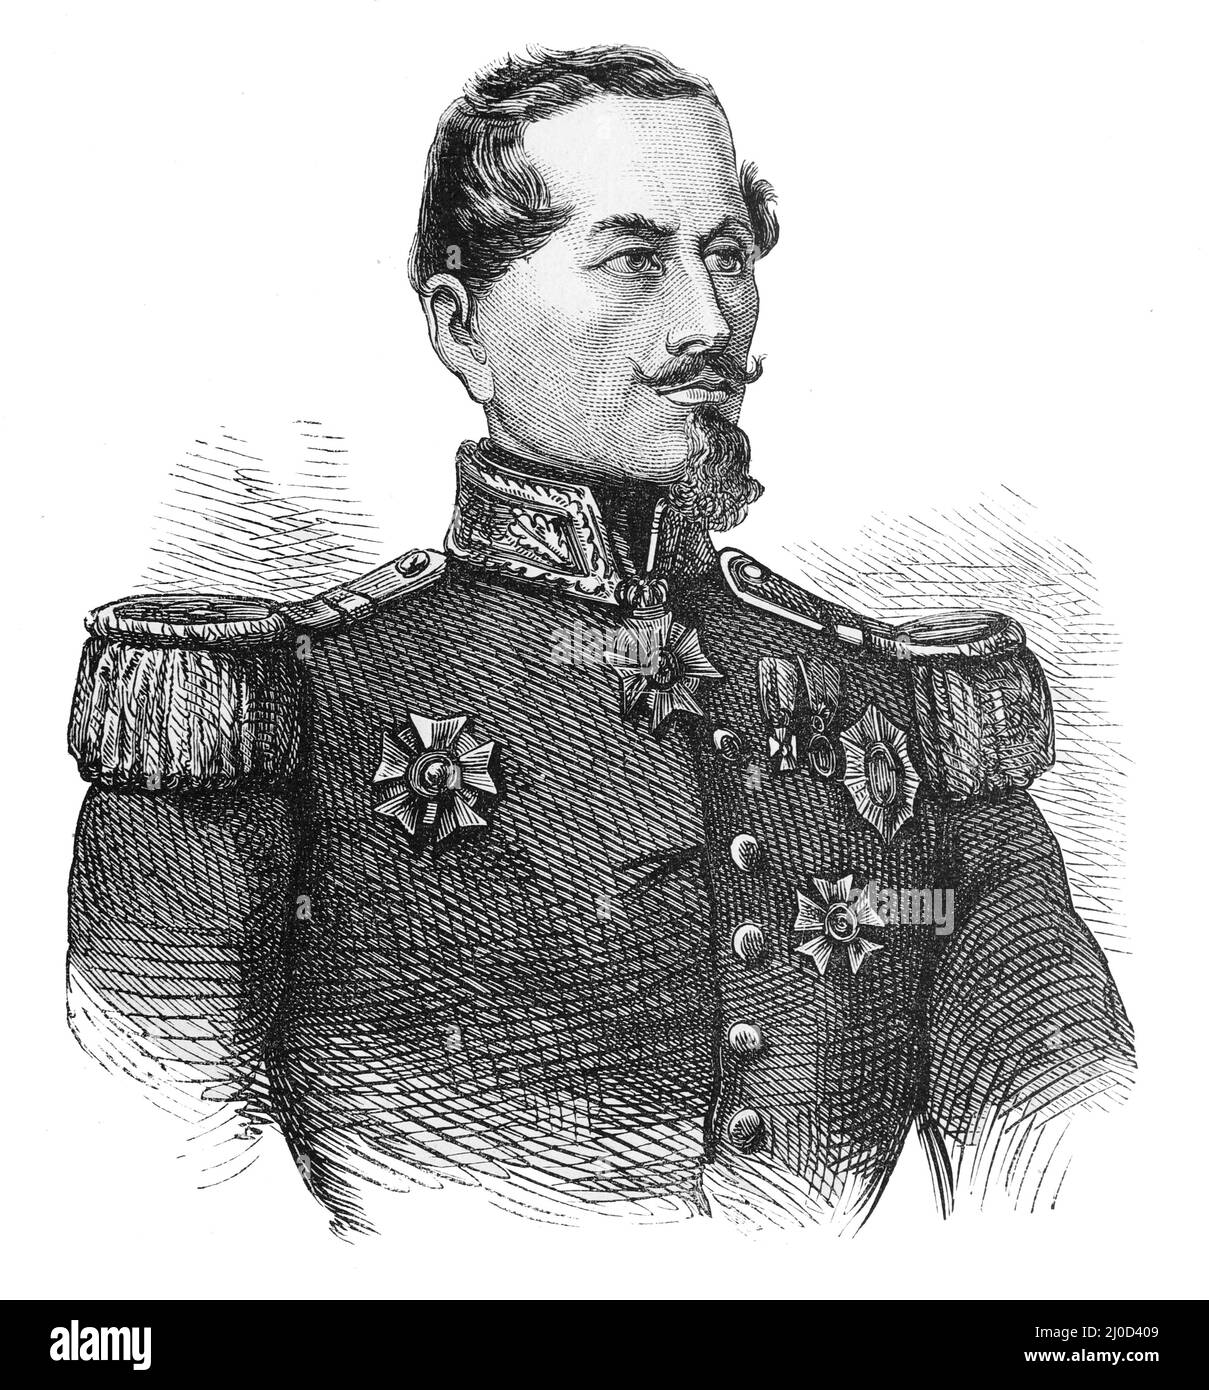 Portrait of Marshal Armand-Jacques Leroy de Saint-Arnaud, Commander-in-Chielf of the French Army of the East during the Crimean War; Black and White Illustration Stock Photo